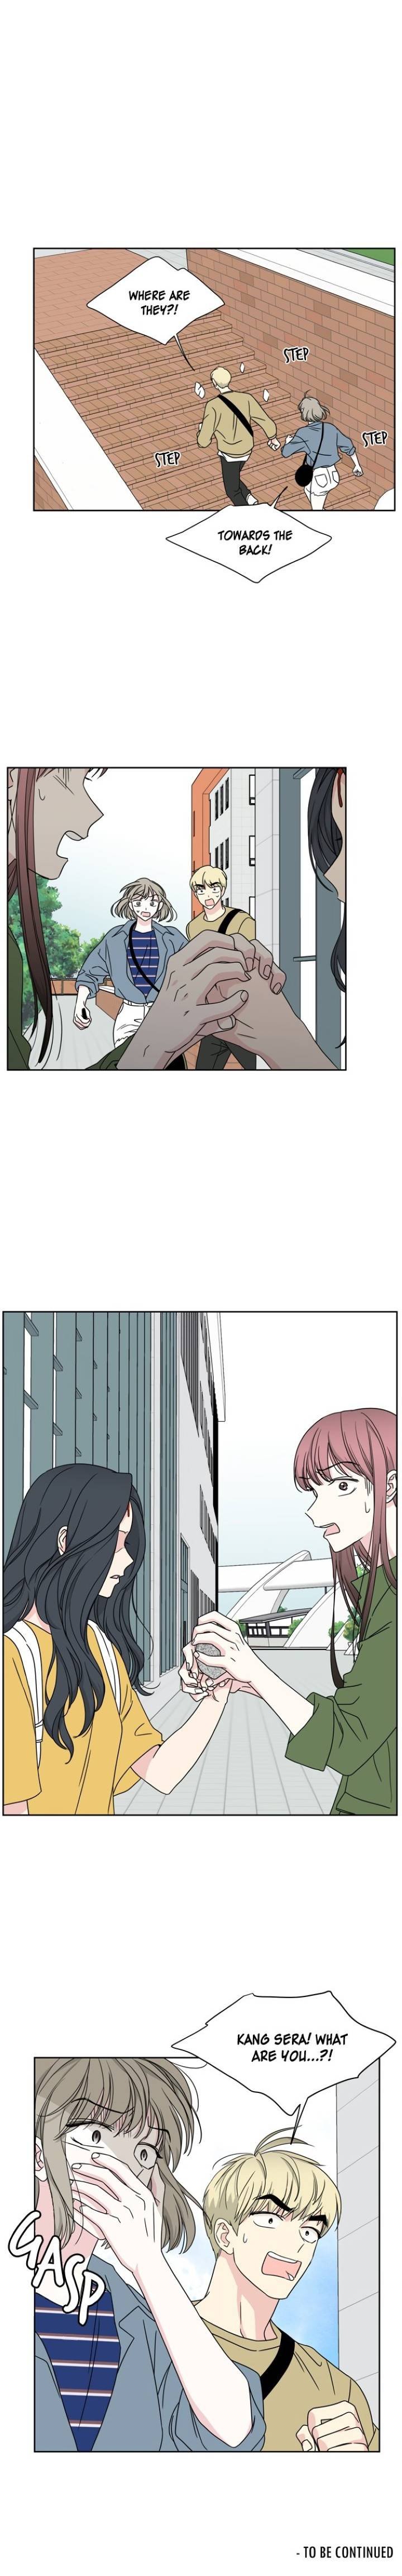 mother-im-sorry-chap-25-12